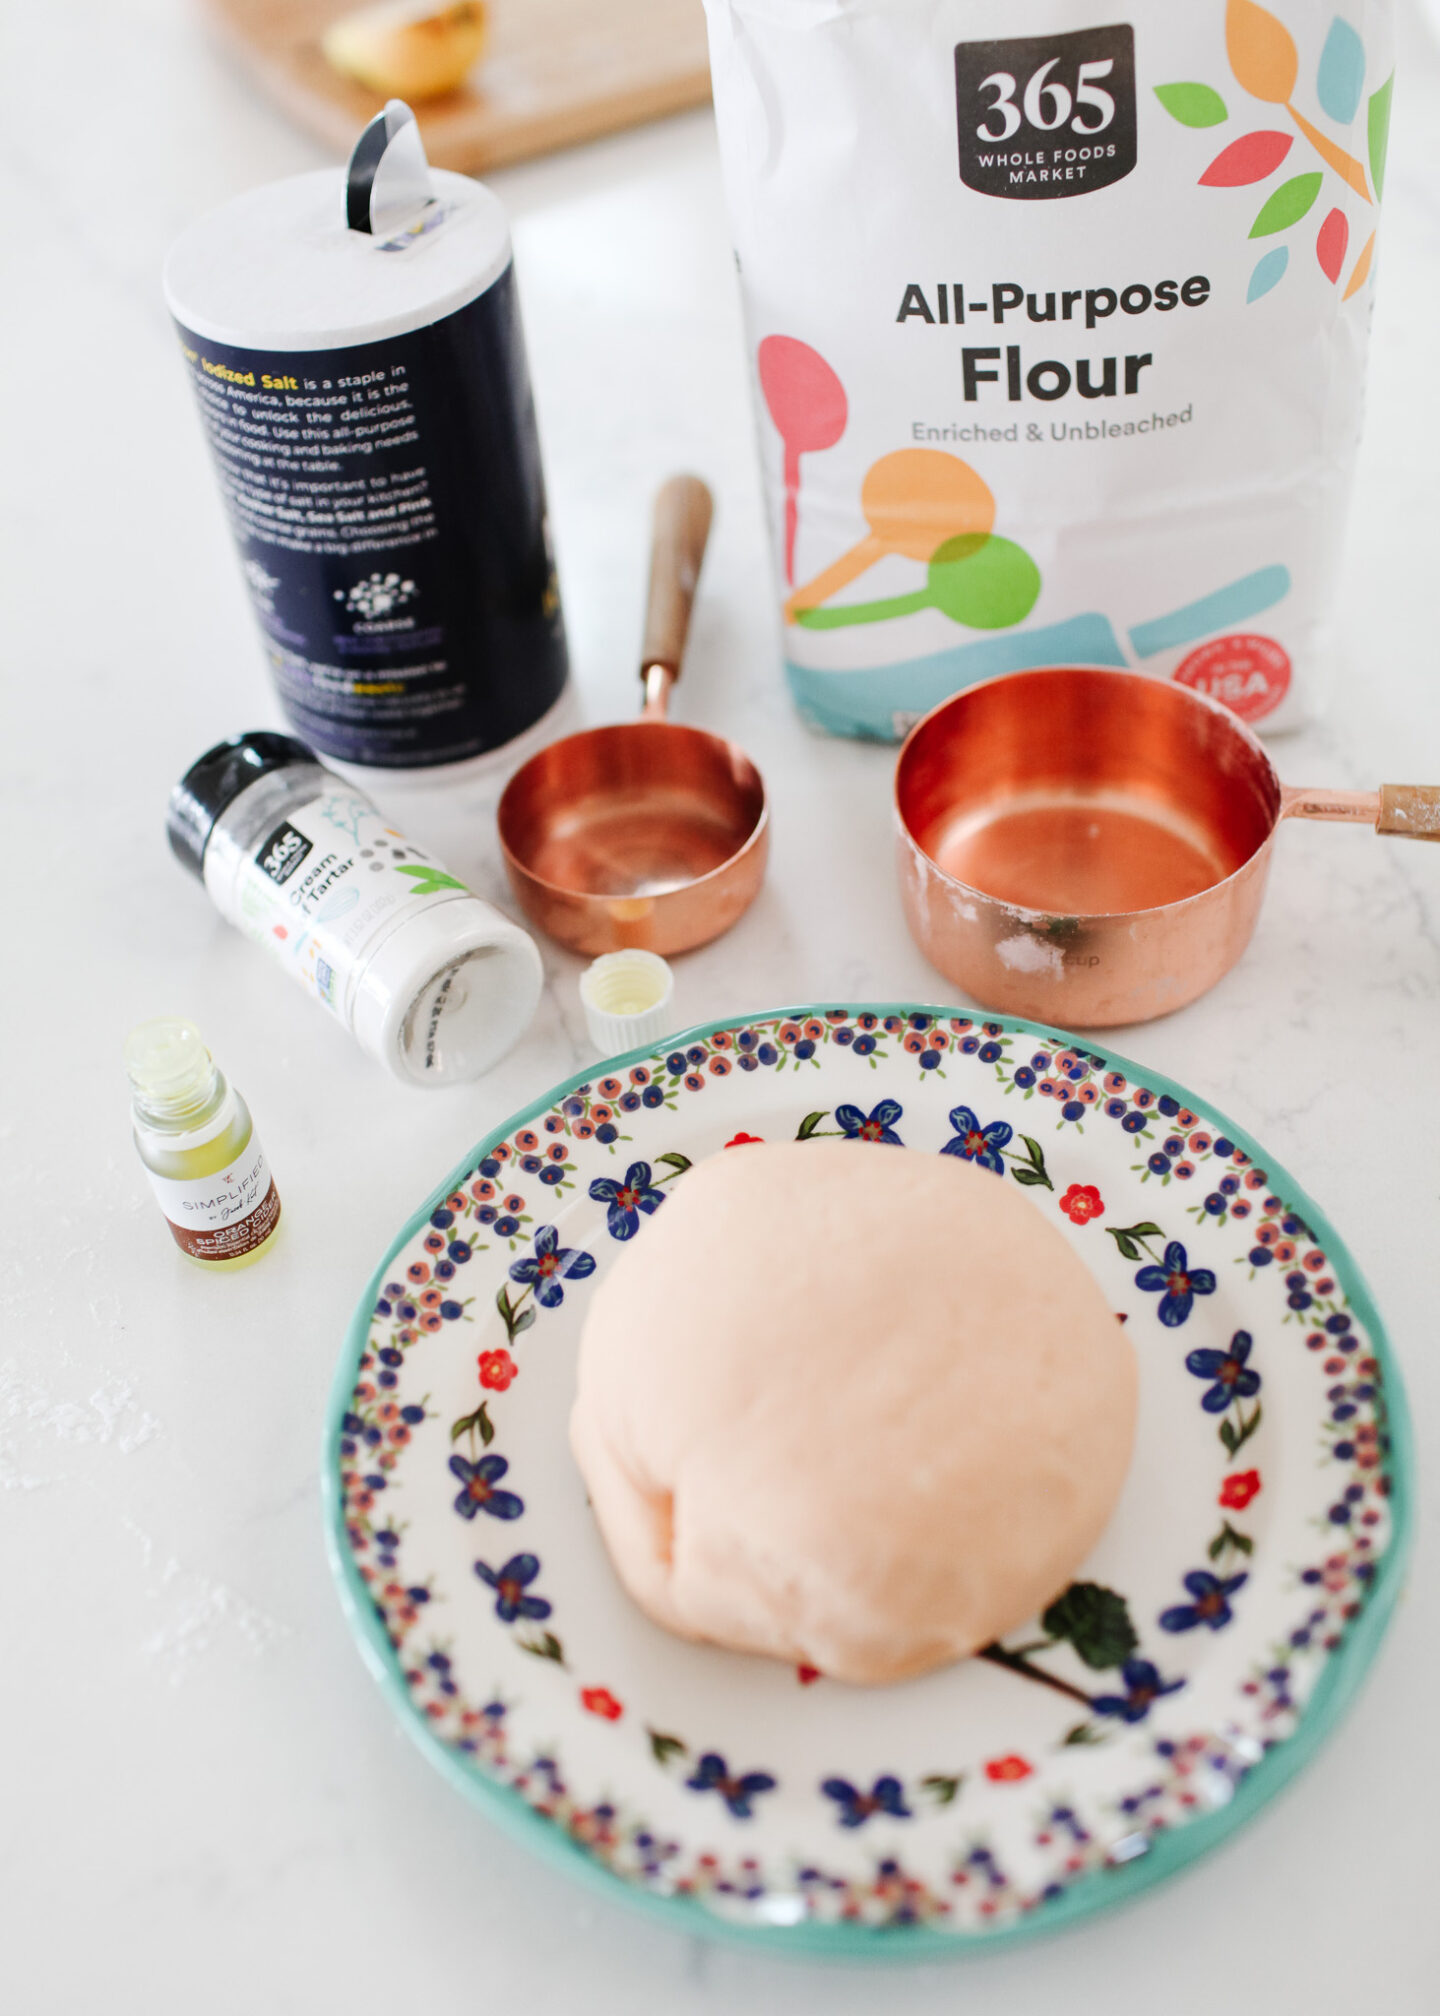 Homemade playdough on plate with ingredients and measuring cups around it.